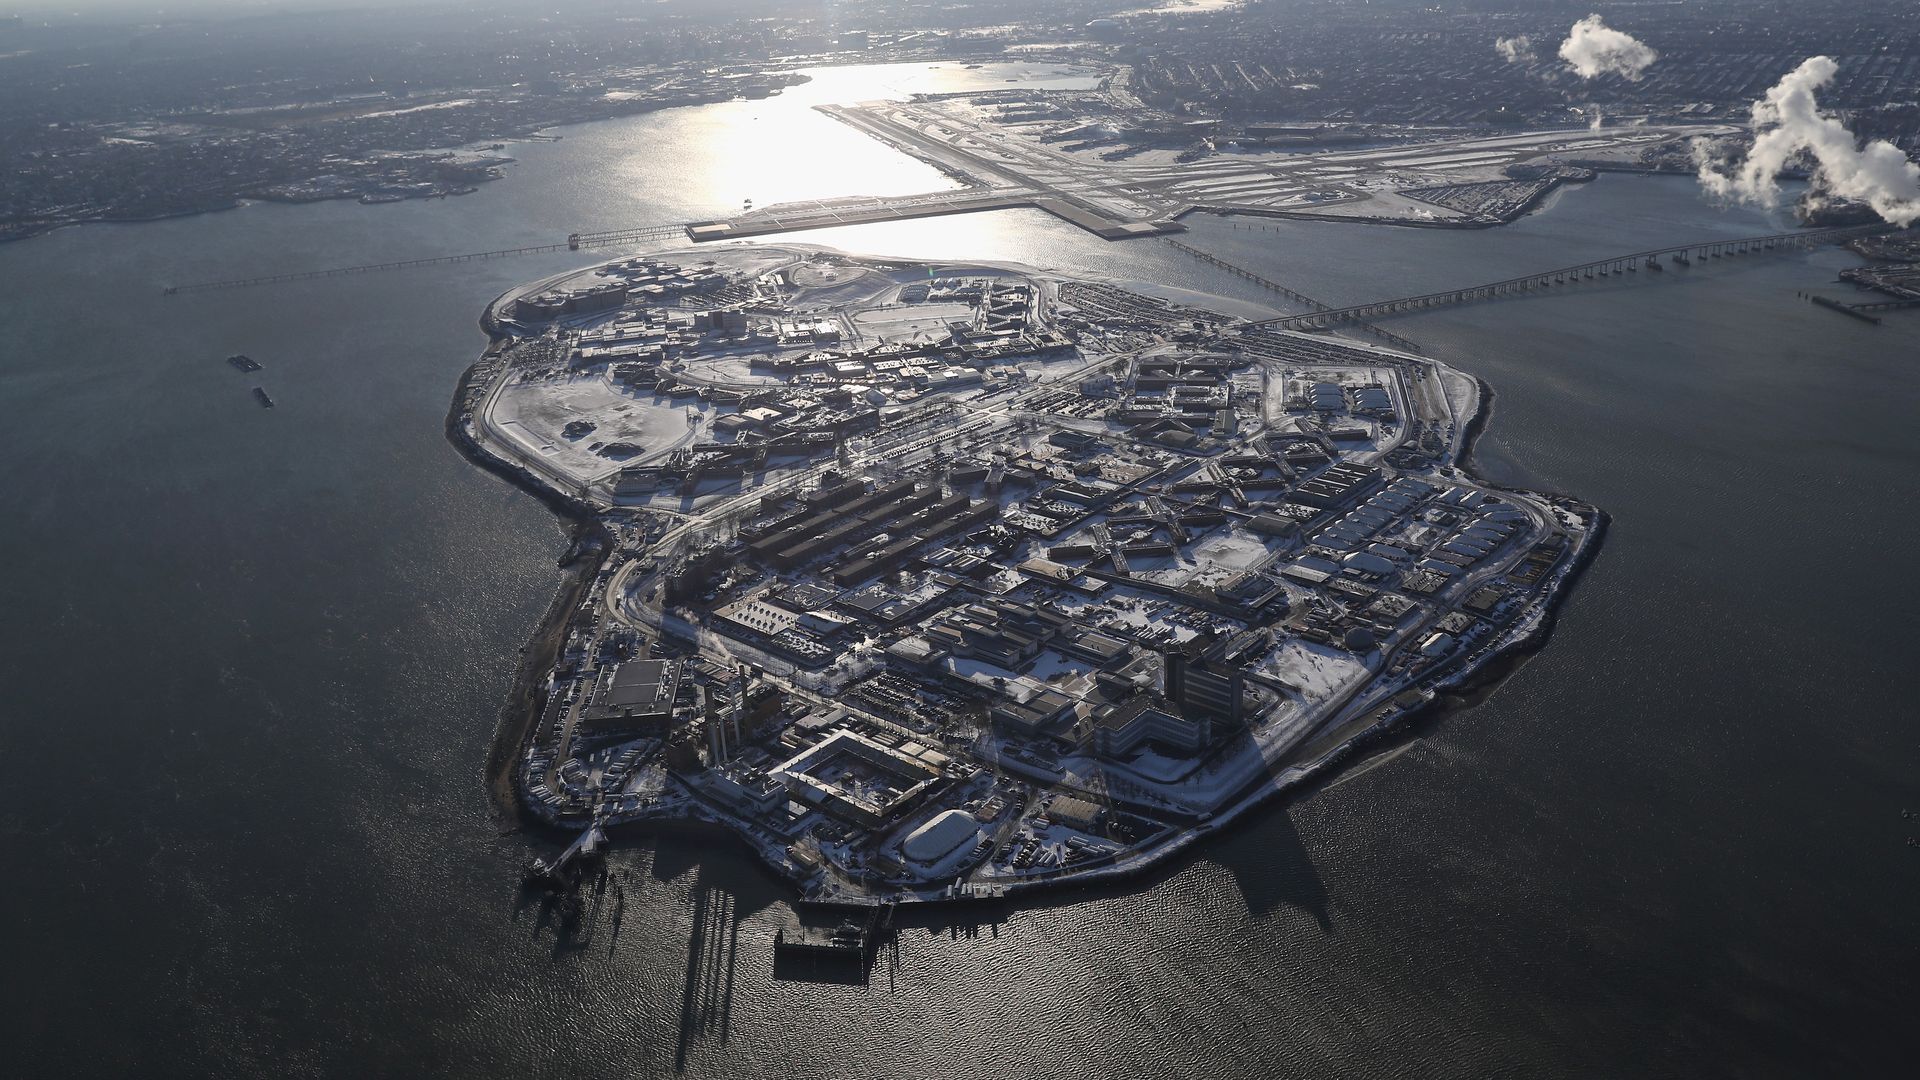 A view of Rikers Island.